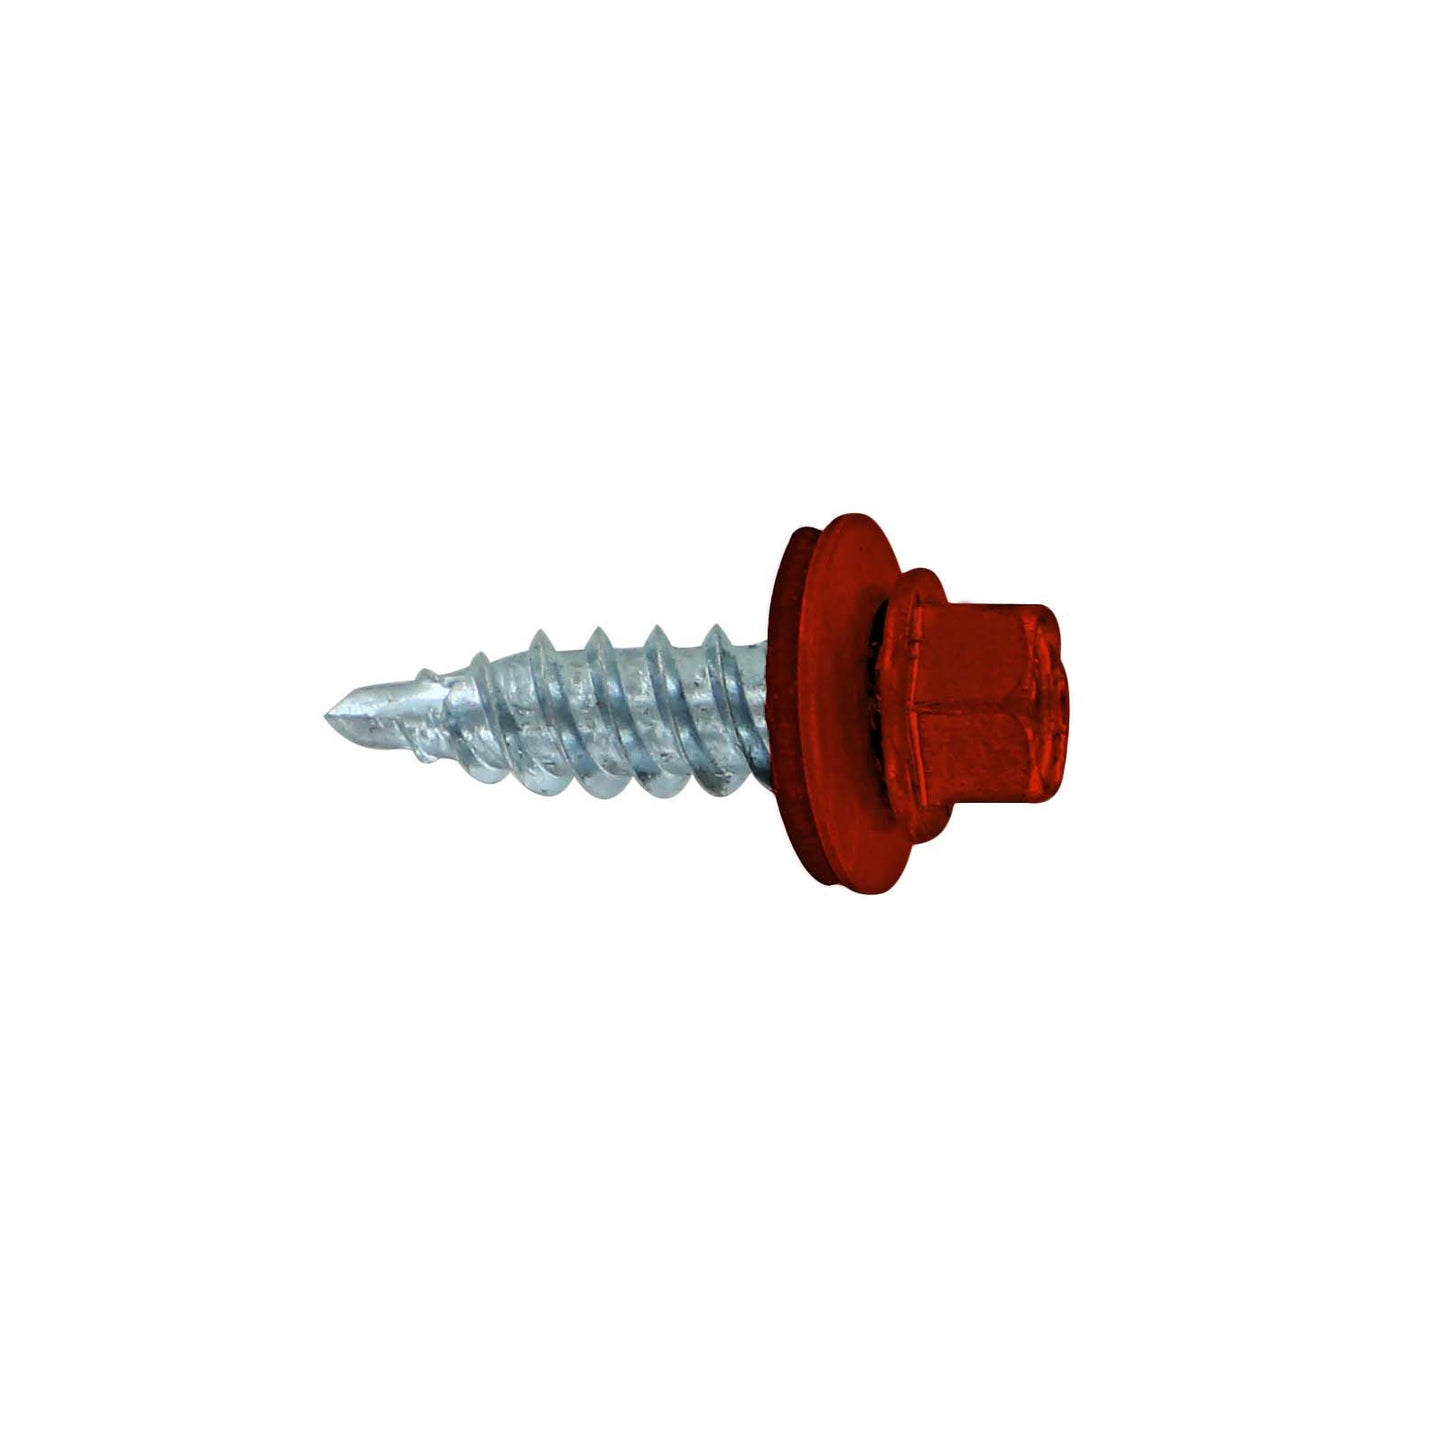 #12 x 34 inch Kwikseal Woodbinder Metal Roofing Stitch Screw Rustic Red Pkg 250 image 1 of 2